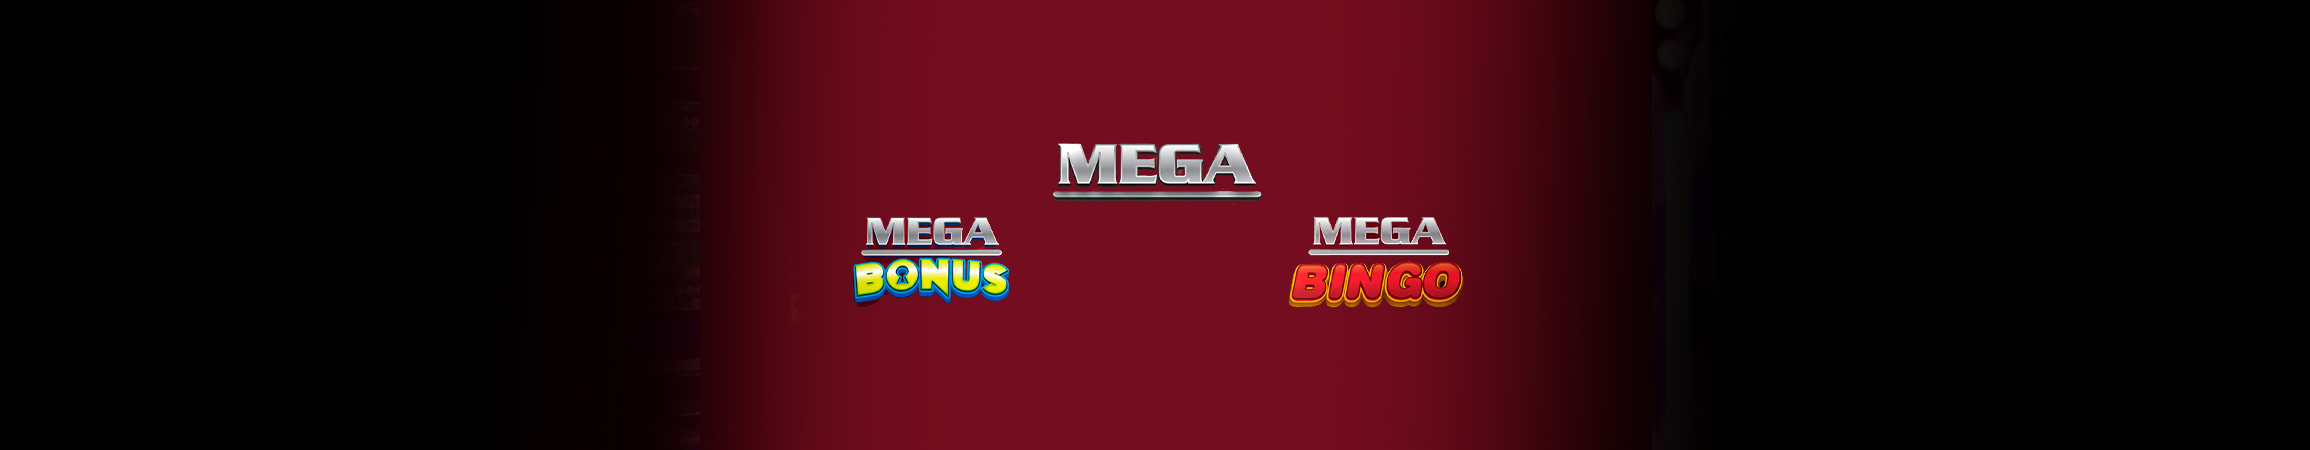 MEGA is now available in Mexico.